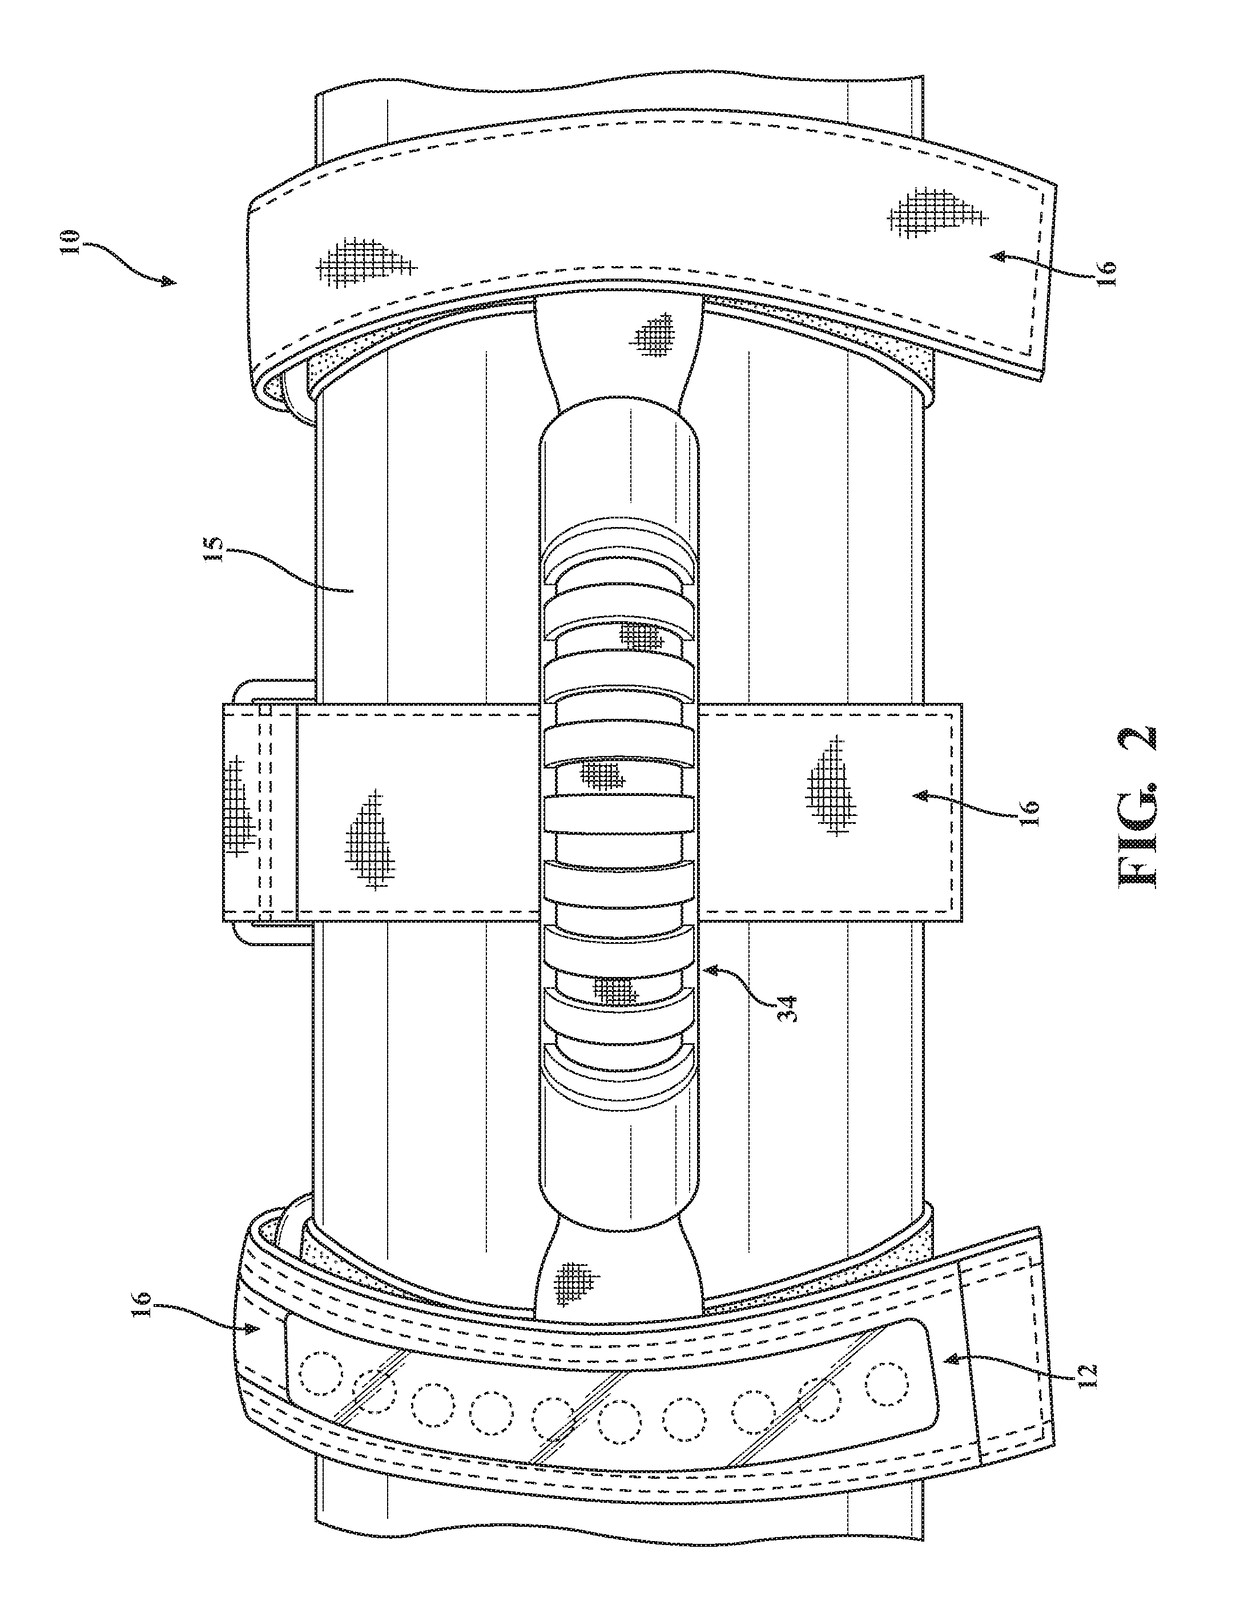 Lighting device for a sport utility vehicle or utility task vehicle